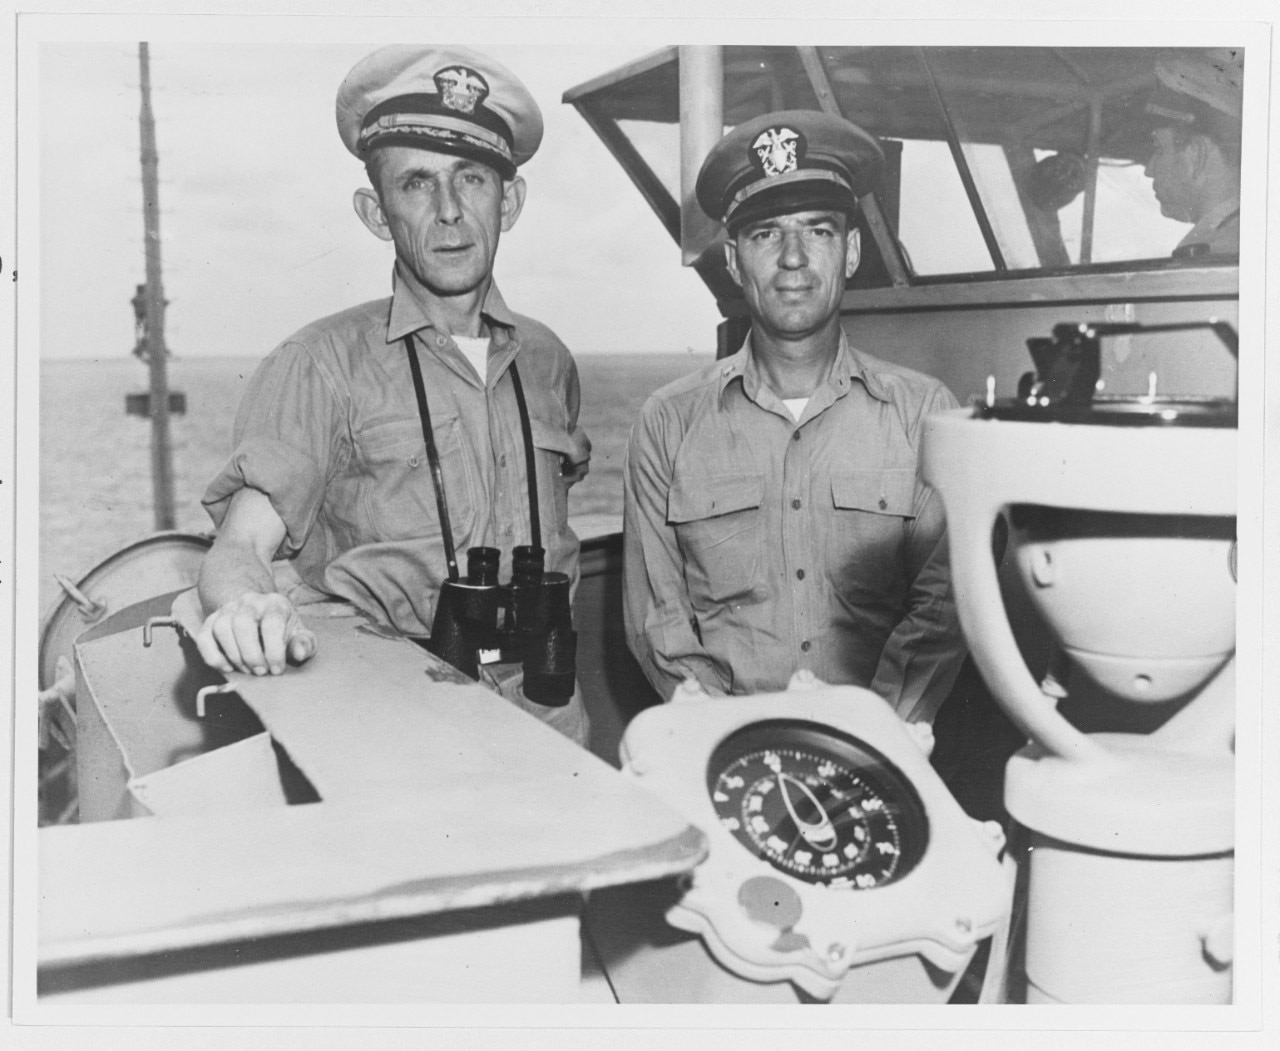 Two sailors pose for a photograph near the bridge of a ship.